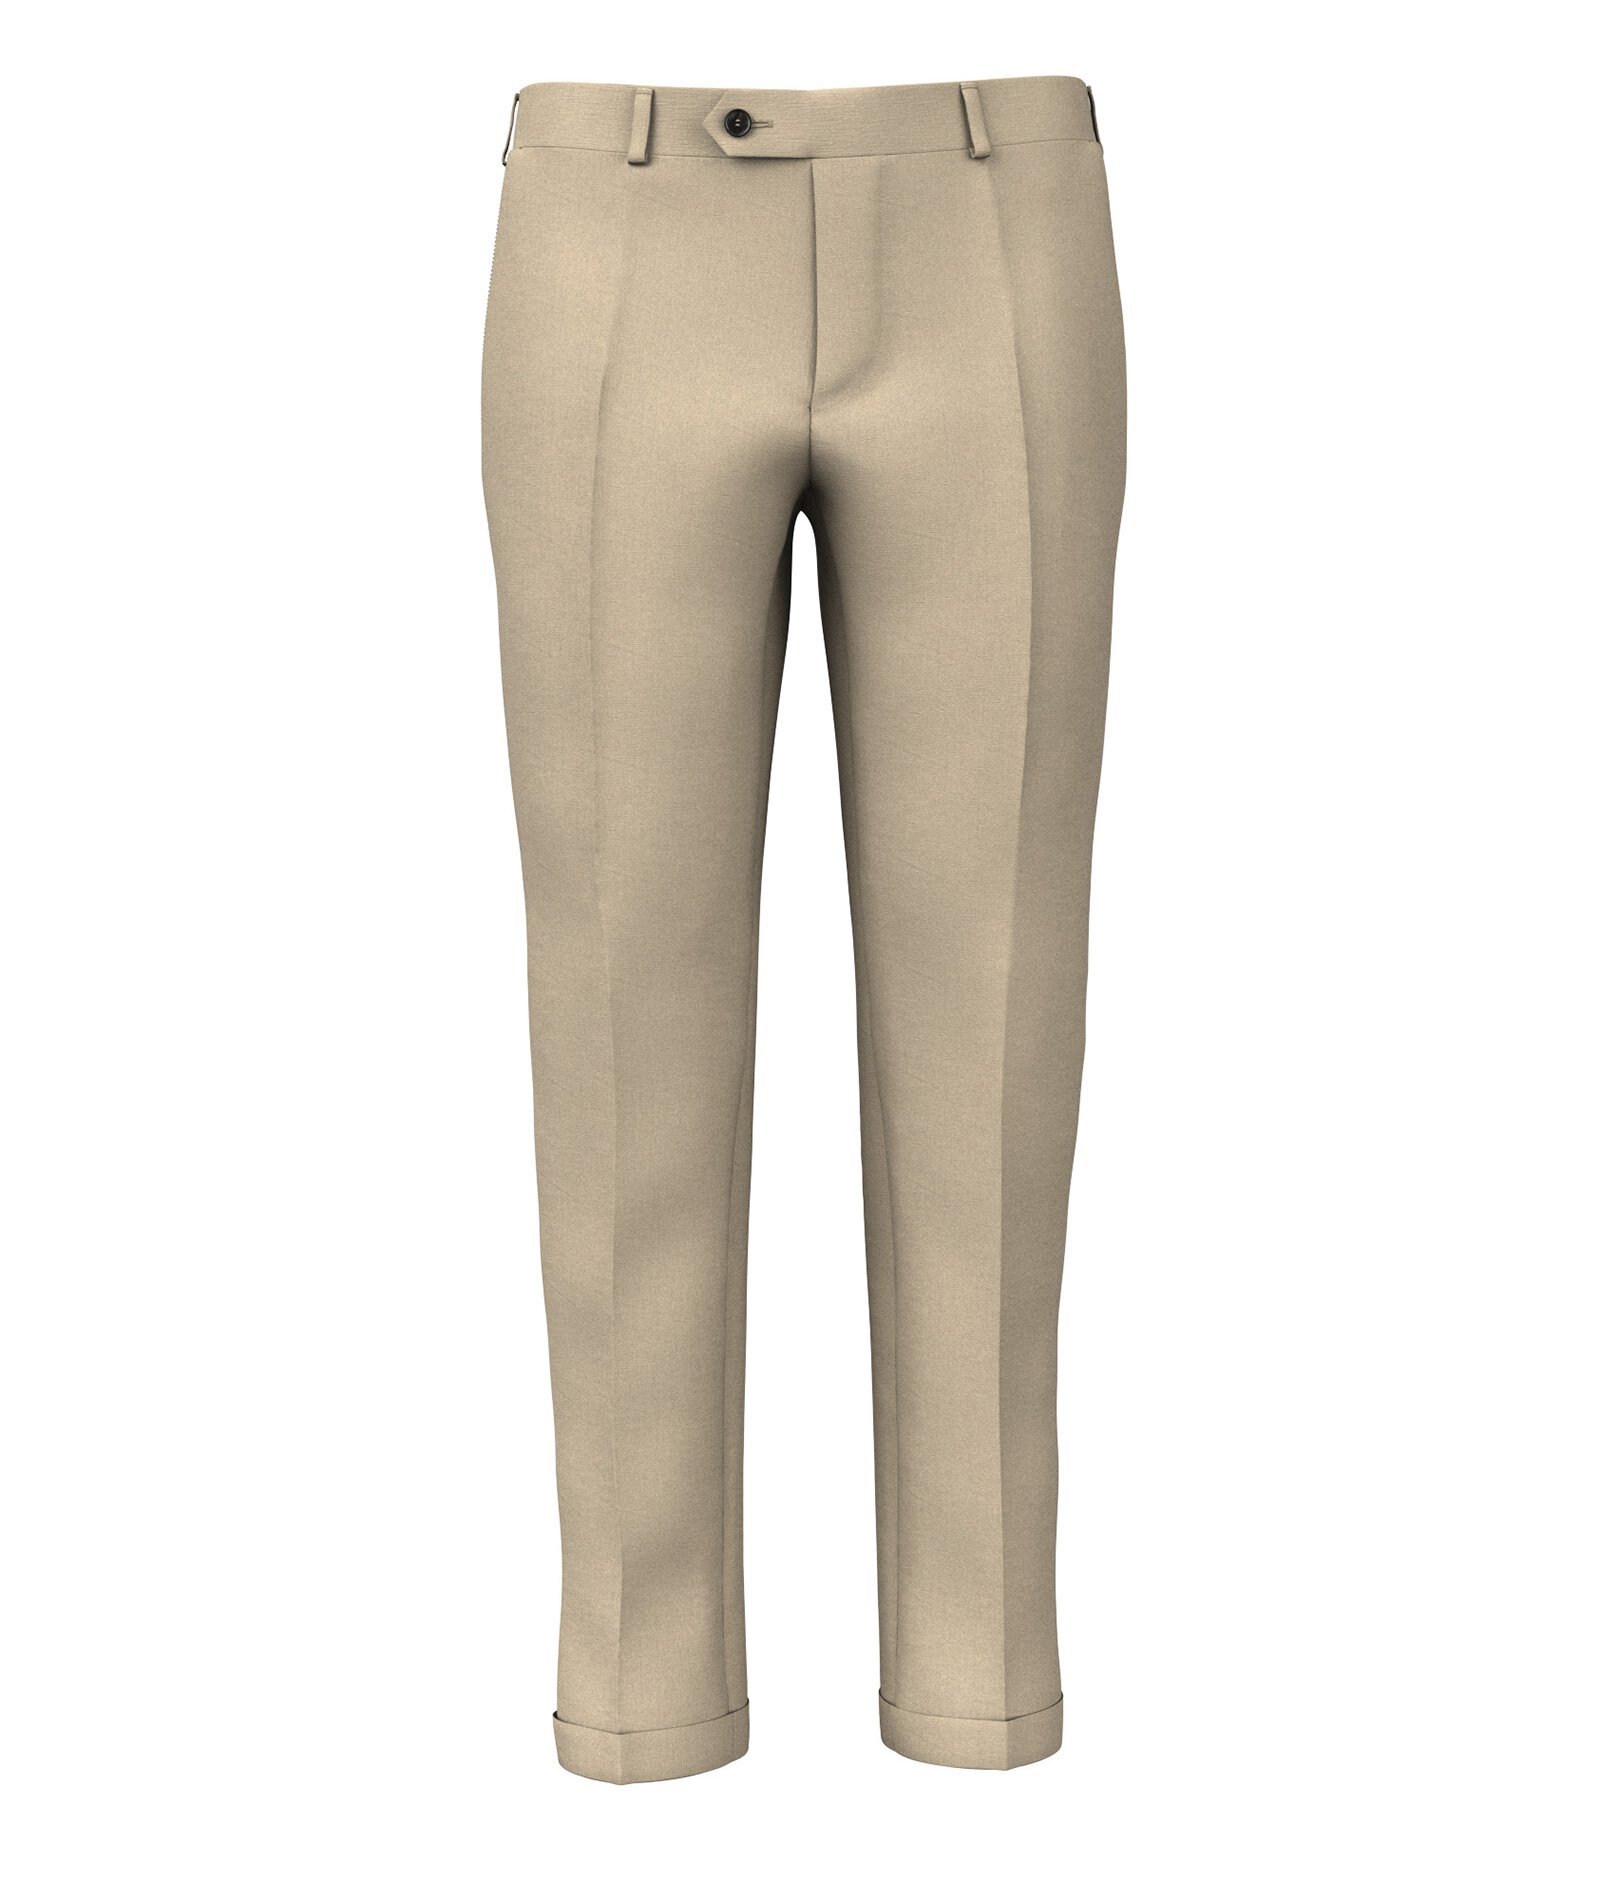 Buy Stretch Smart Trousers from Next India